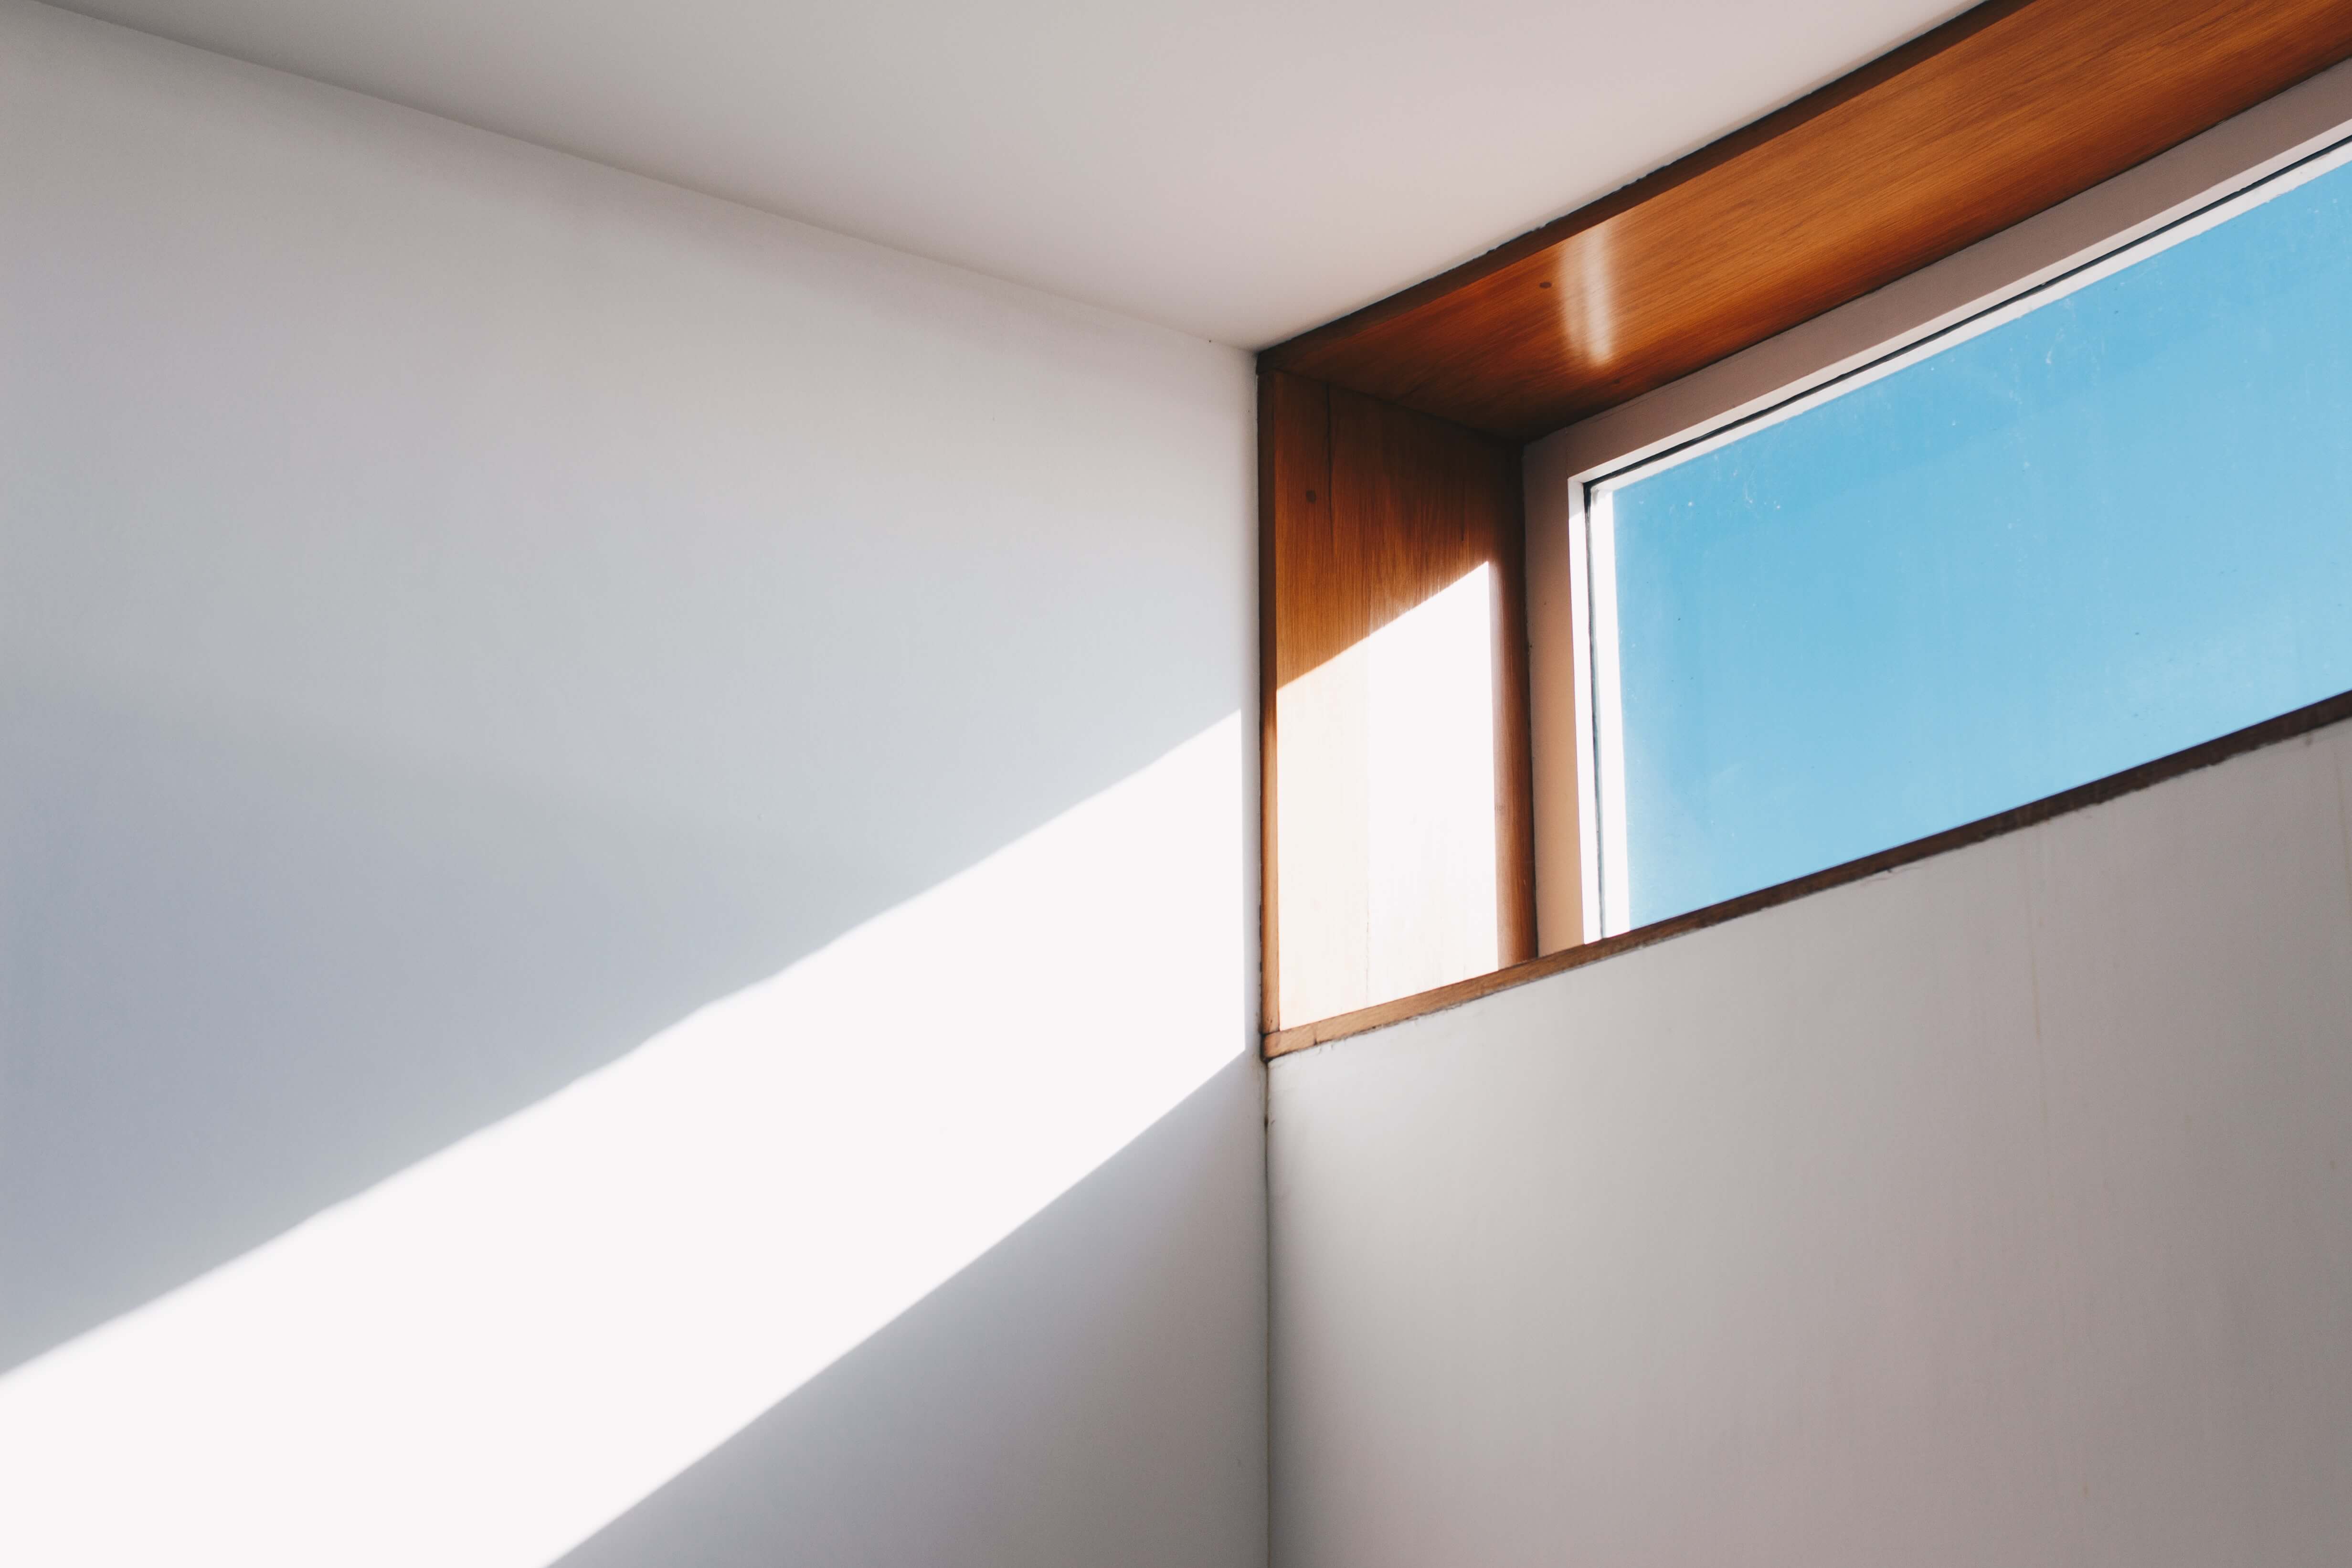 Why Should I upgrade my home with new double glazing?